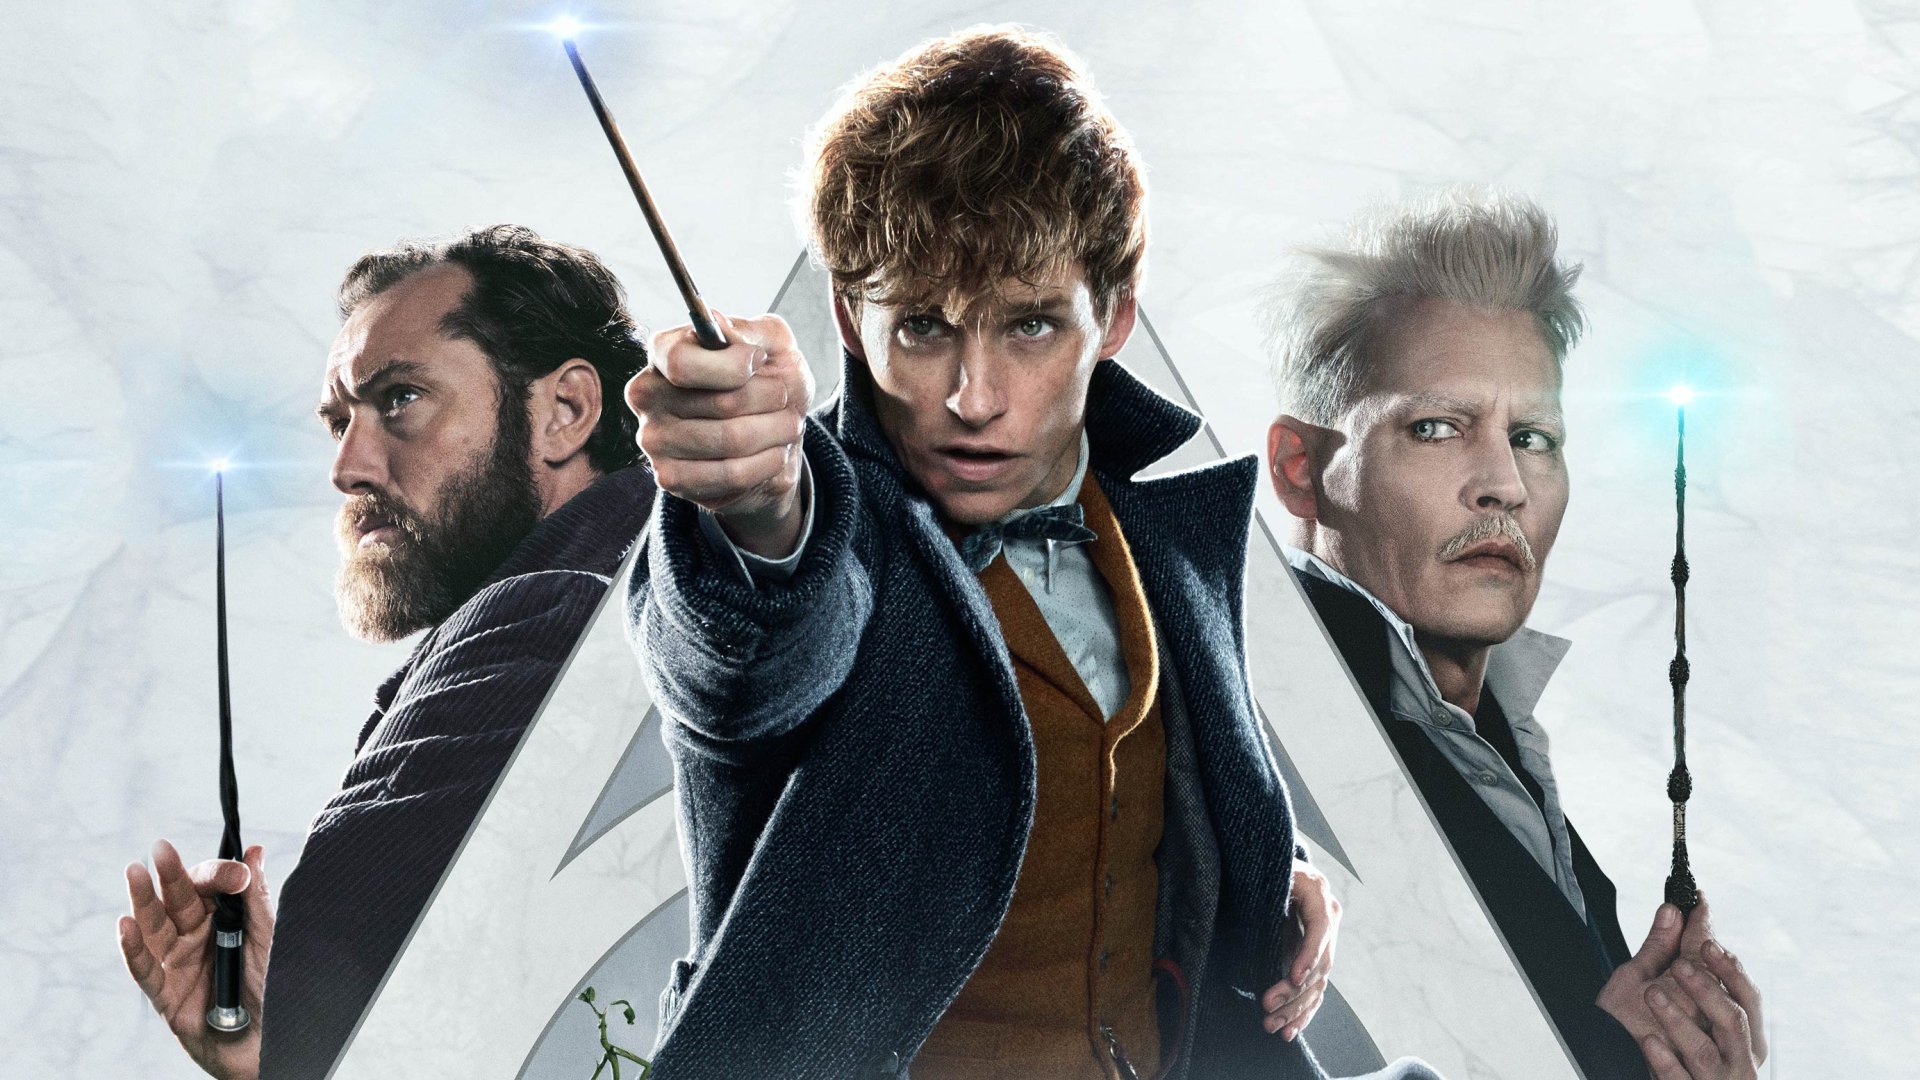 Fantastic Beasts and Where to Find Them download the new for apple